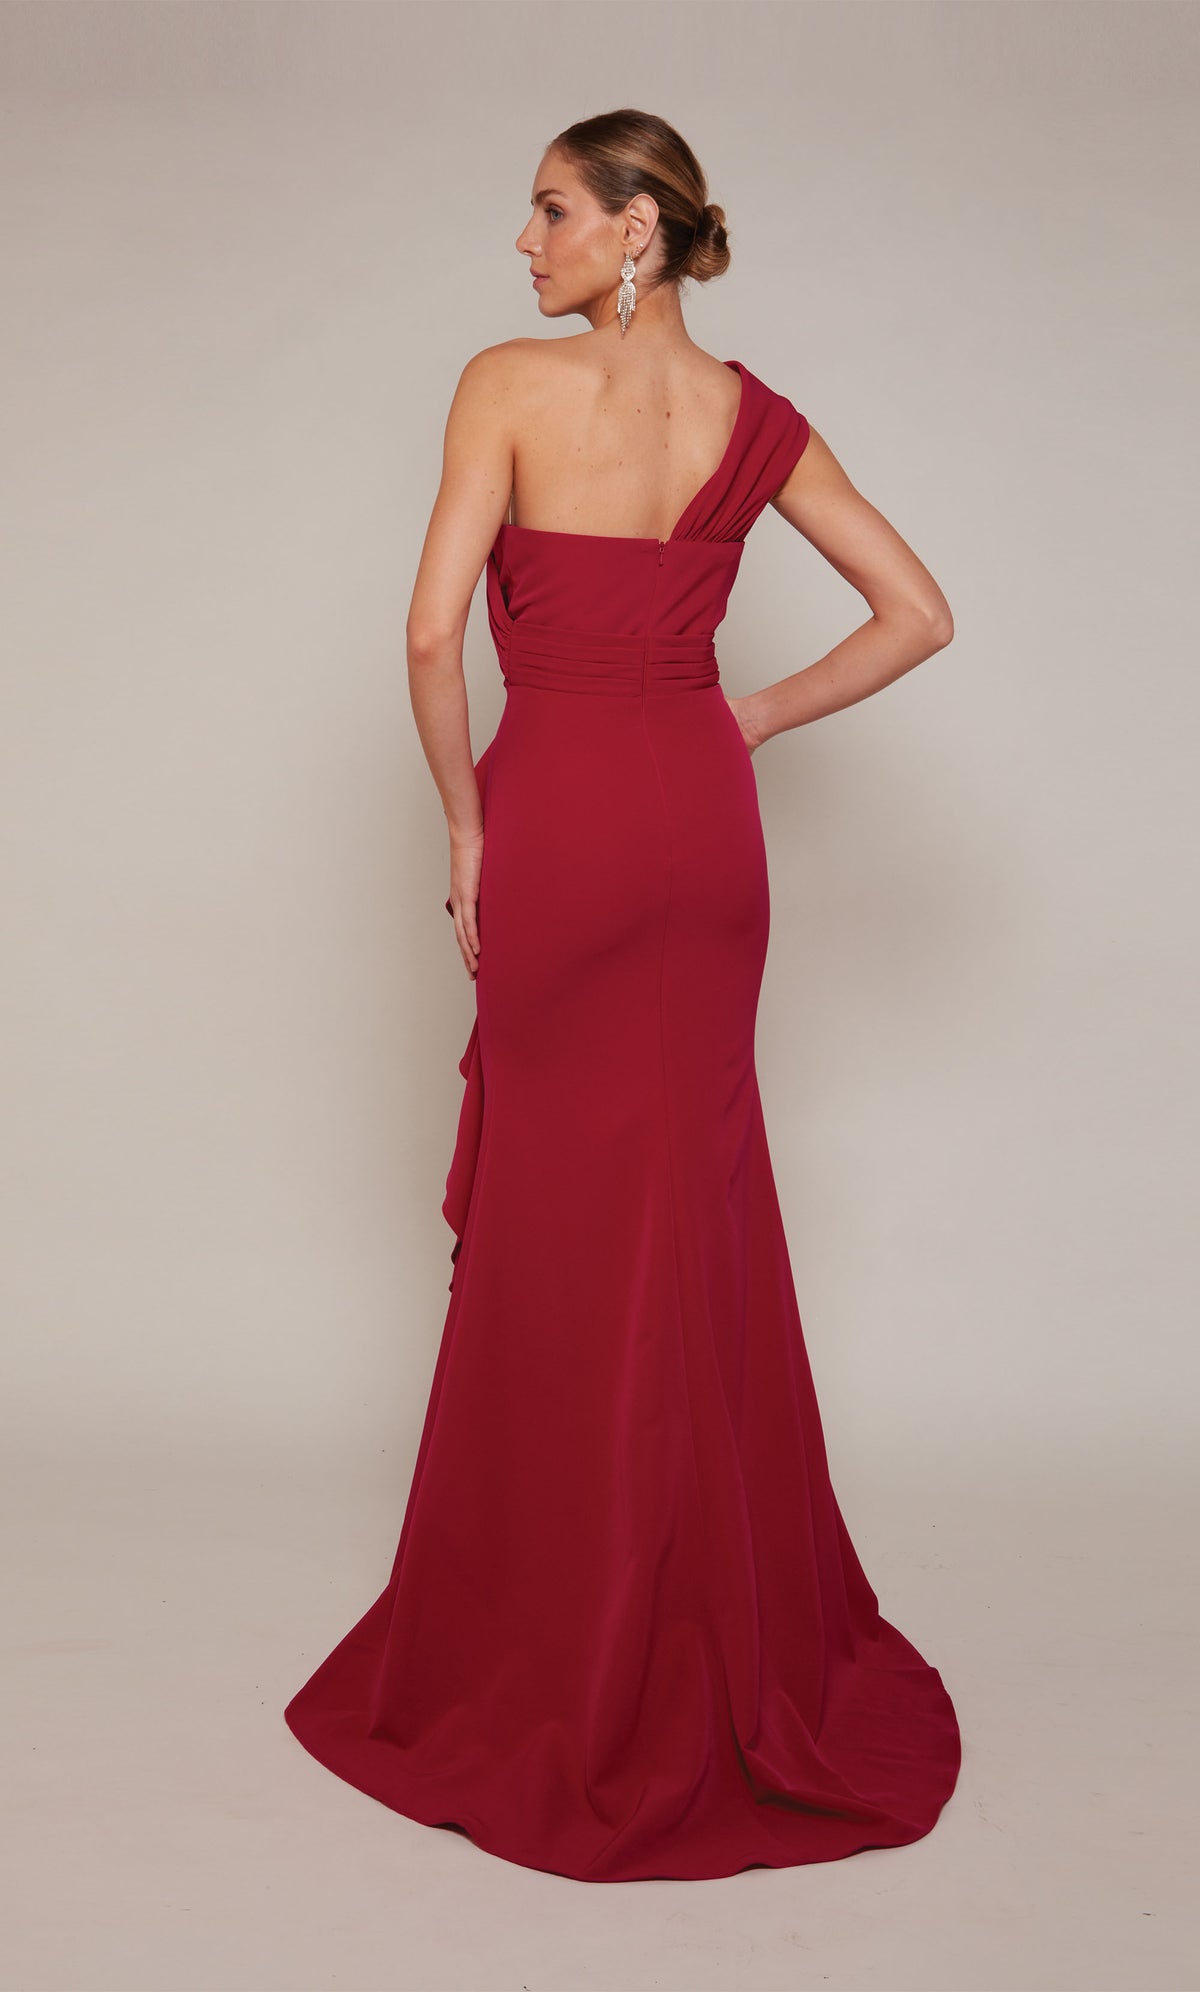 A raspberry pink colored one shoulder evening gown with a zip-up back and a slight train.